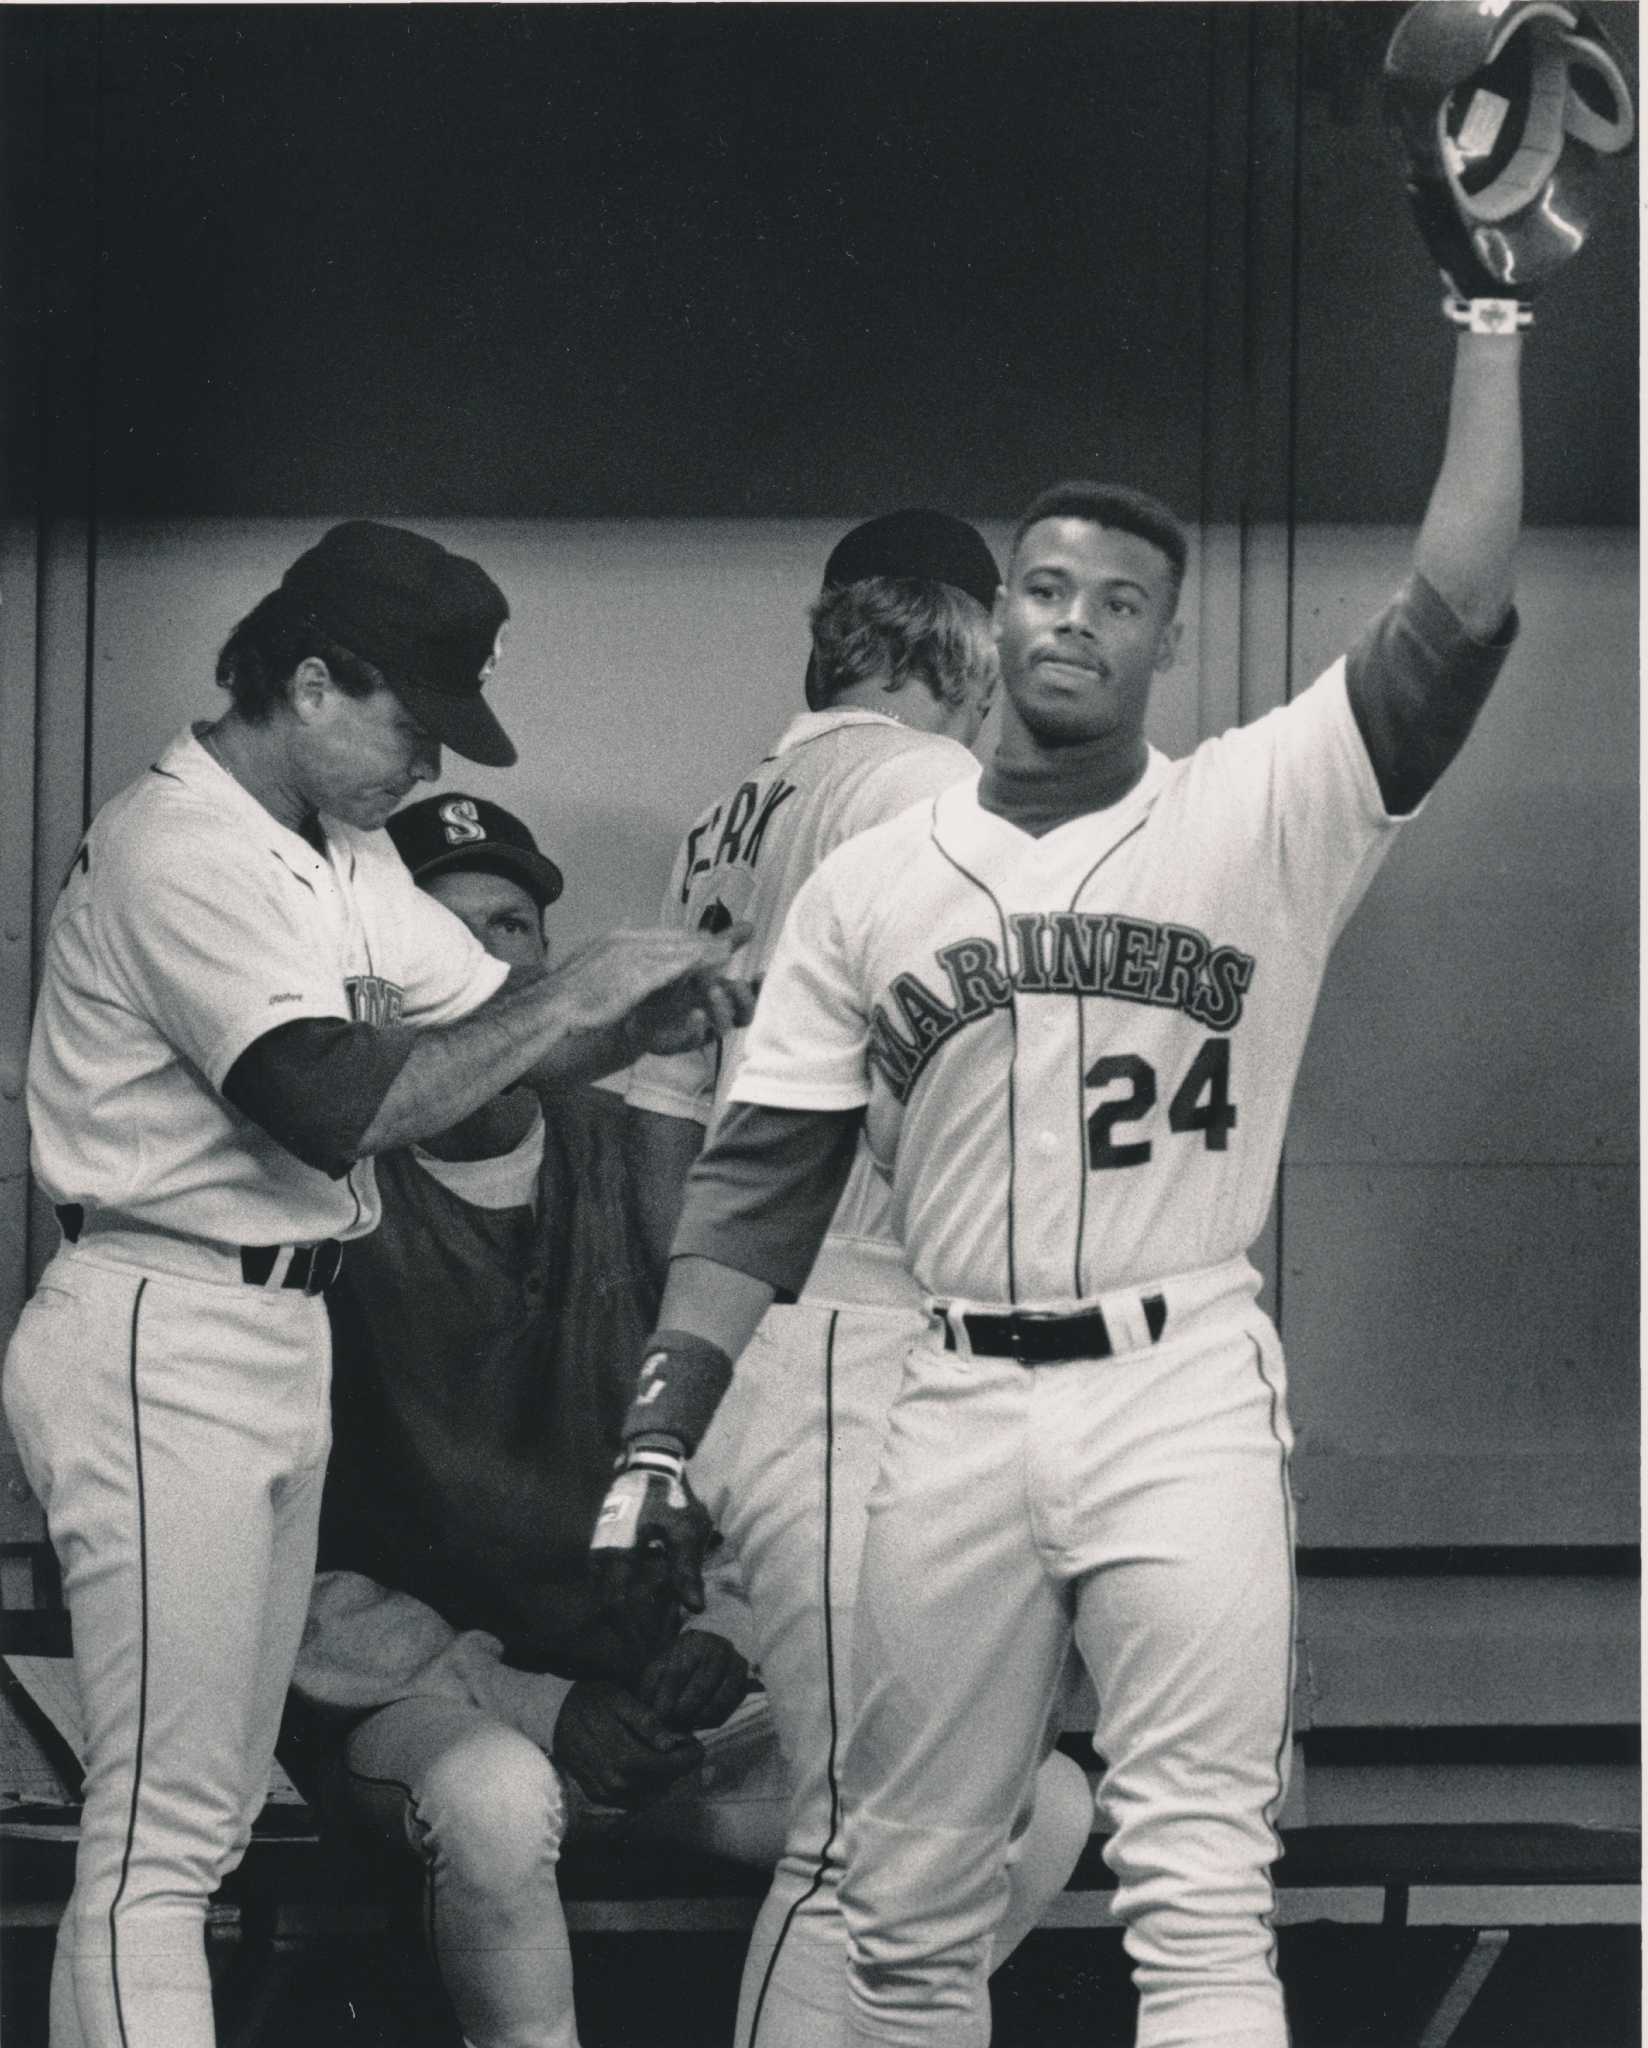 From the archives: New Hall of Famer Ken Griffey Jr. - Mangin Photography  Archive